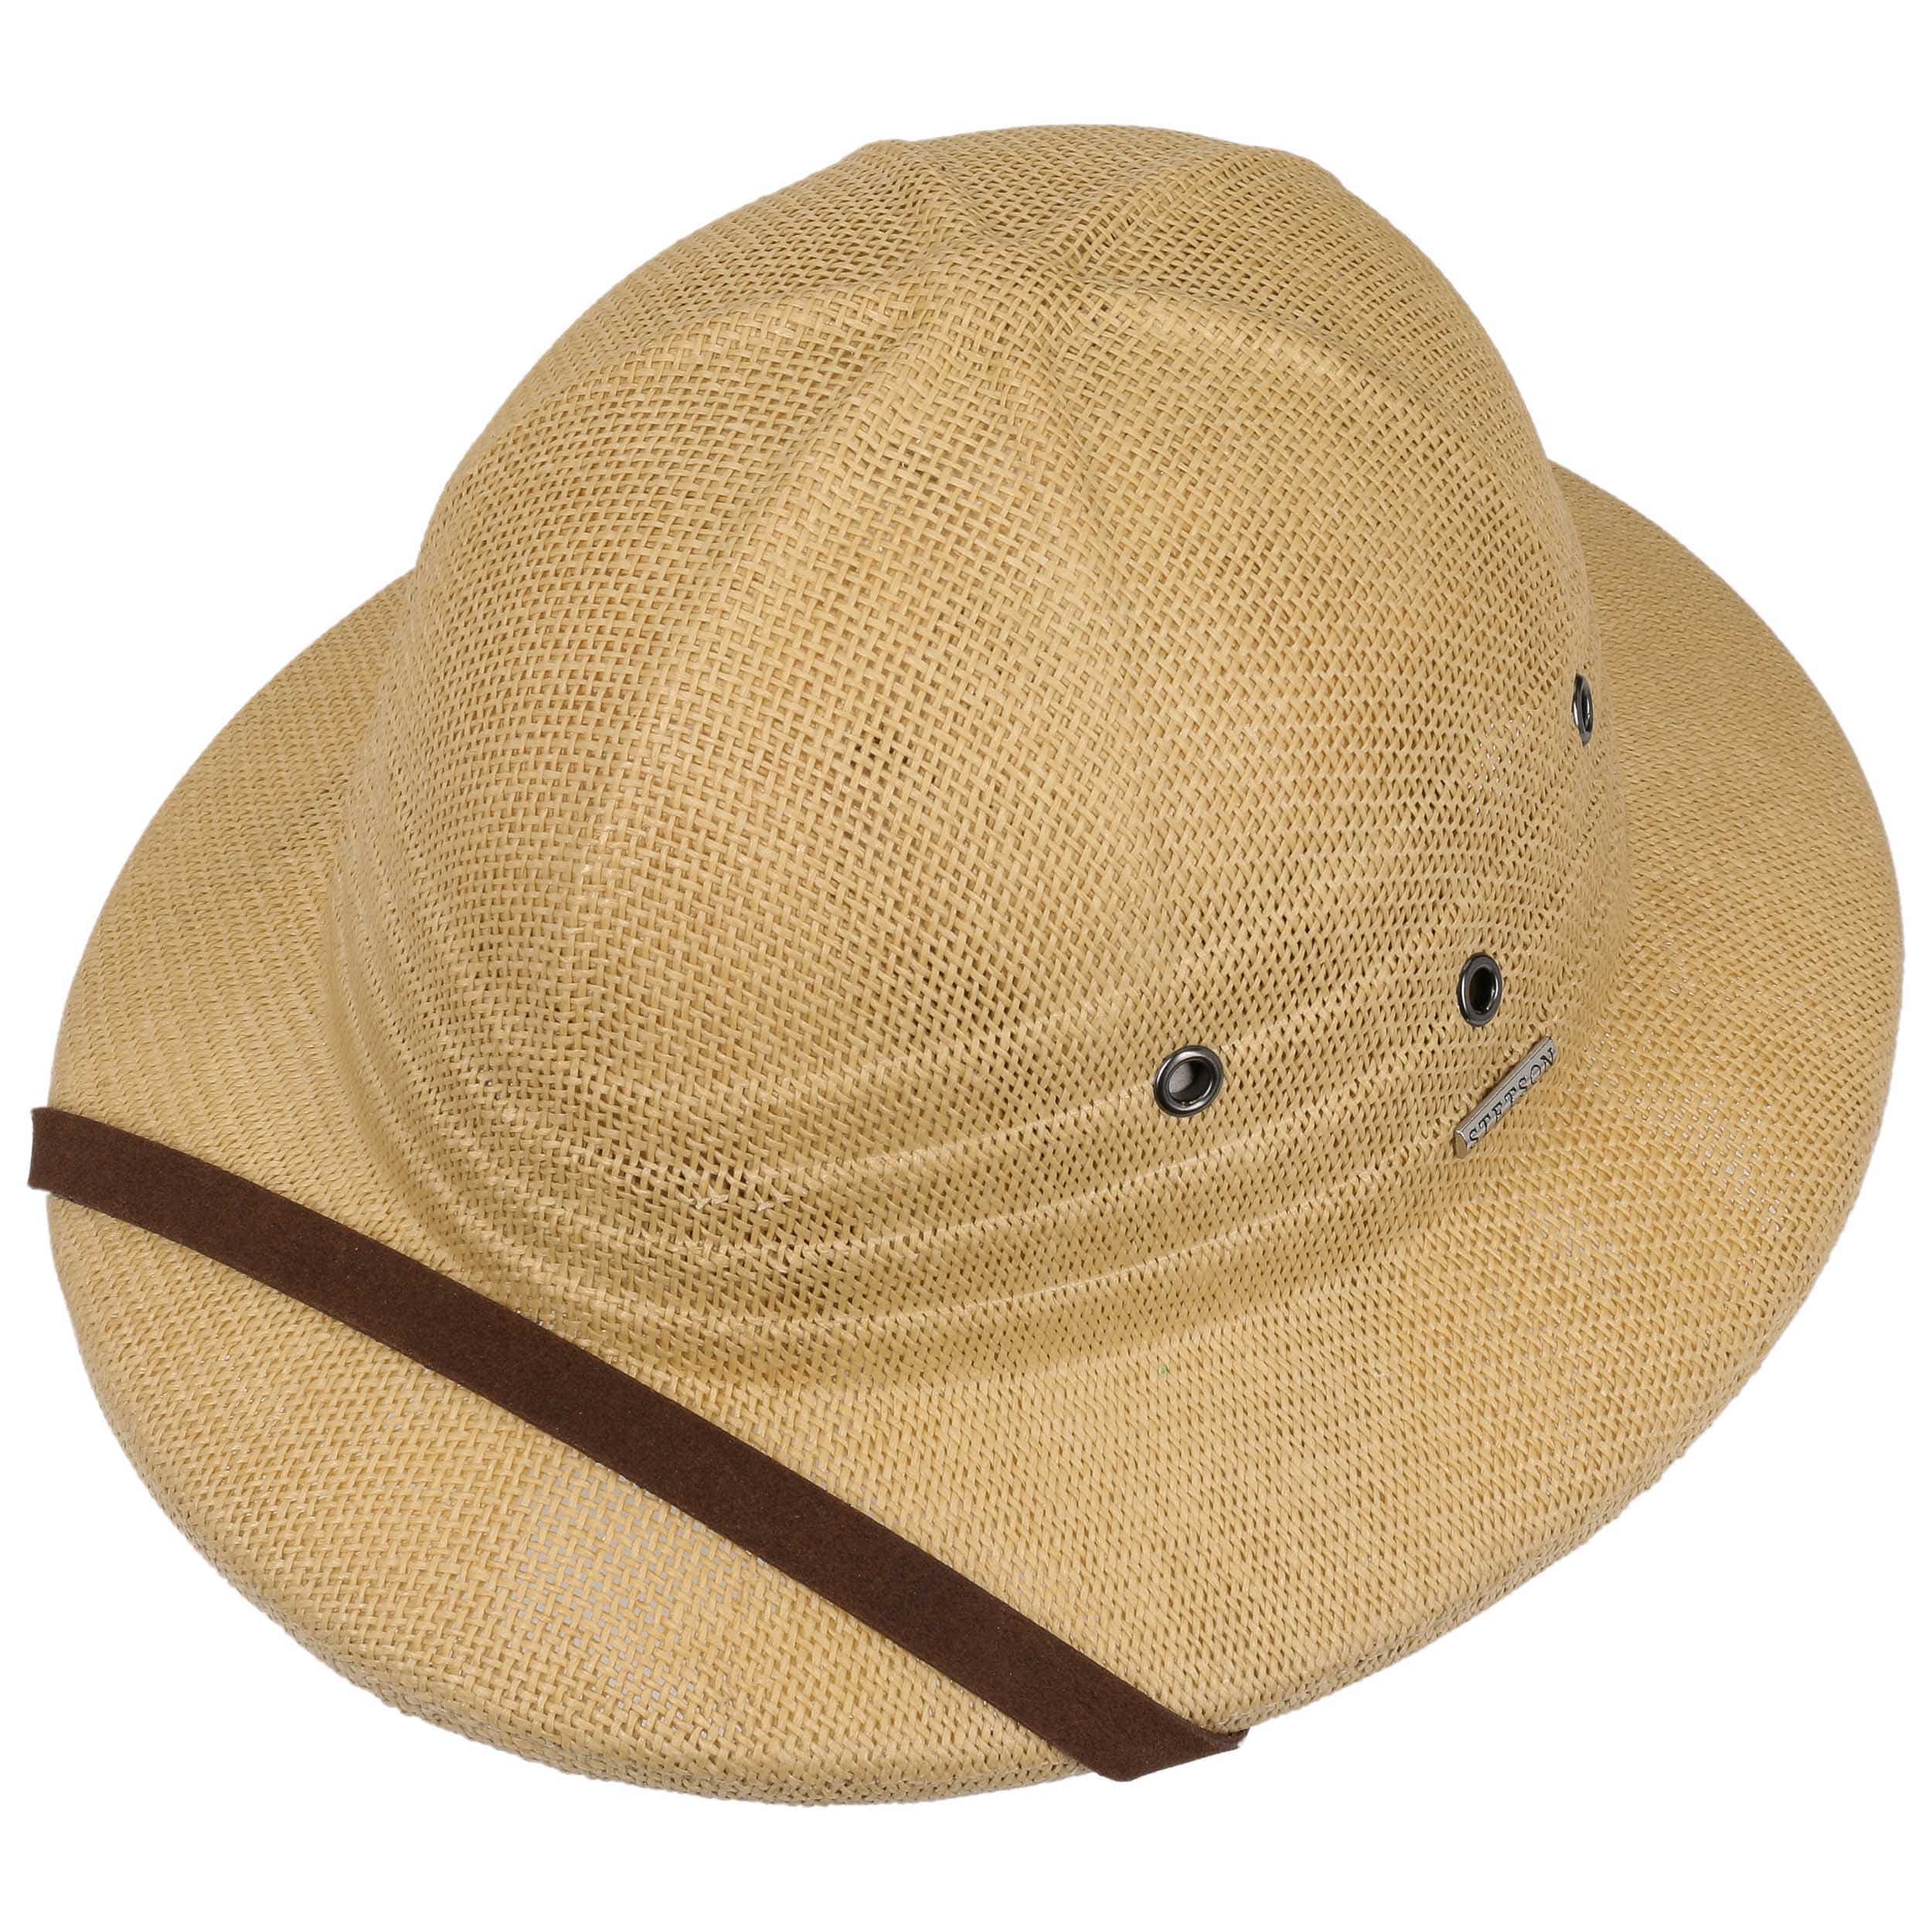 Troutdale Pith Helmet by Stetson - 69,00